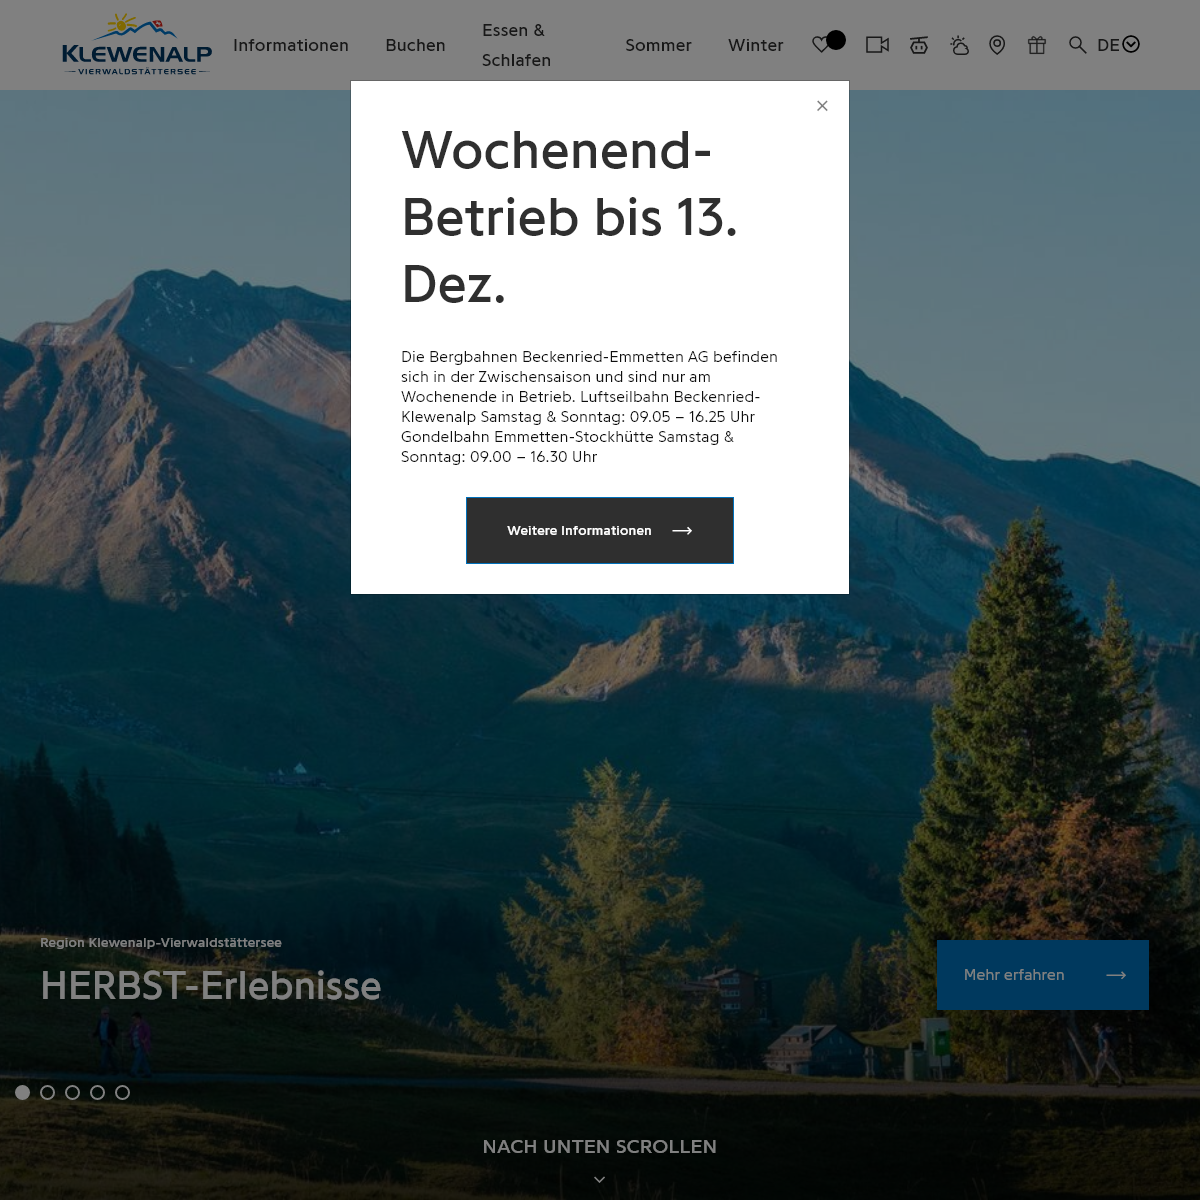 A complete backup of klewenalp.ch